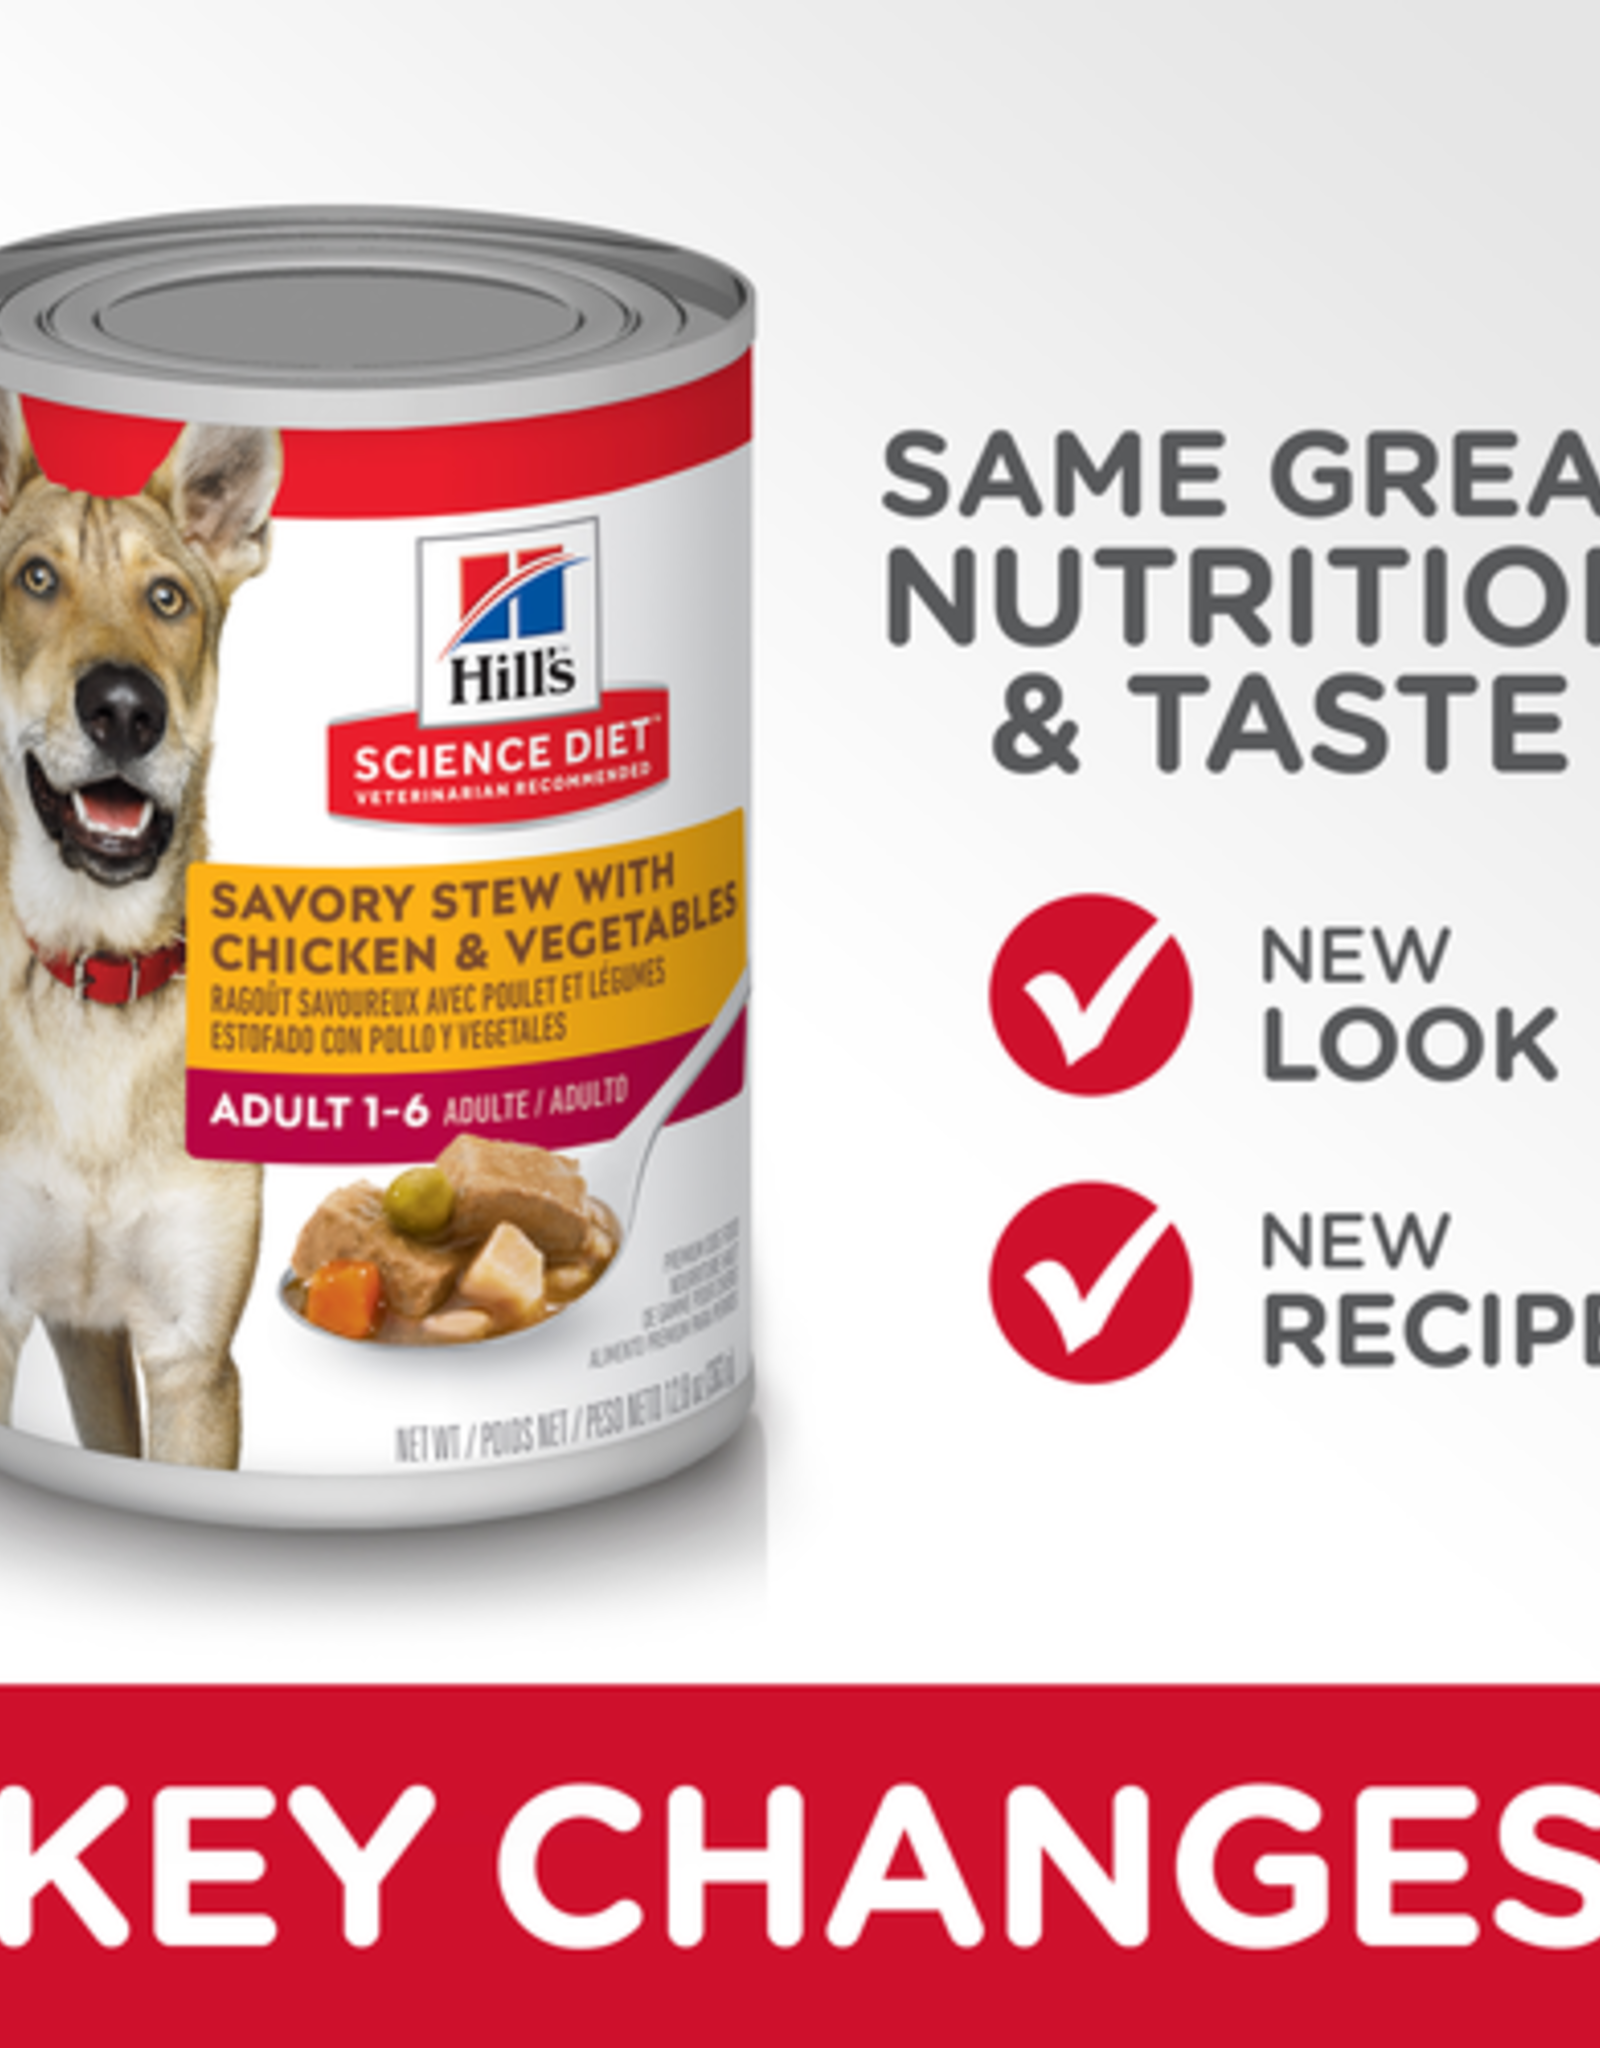 SCIENCE DIET HILL'S SCIENCE DIET DOG ADULT SAVORY STEW CHICKEN & VEGETABLES CAN 12.8OZ CASE OF 12